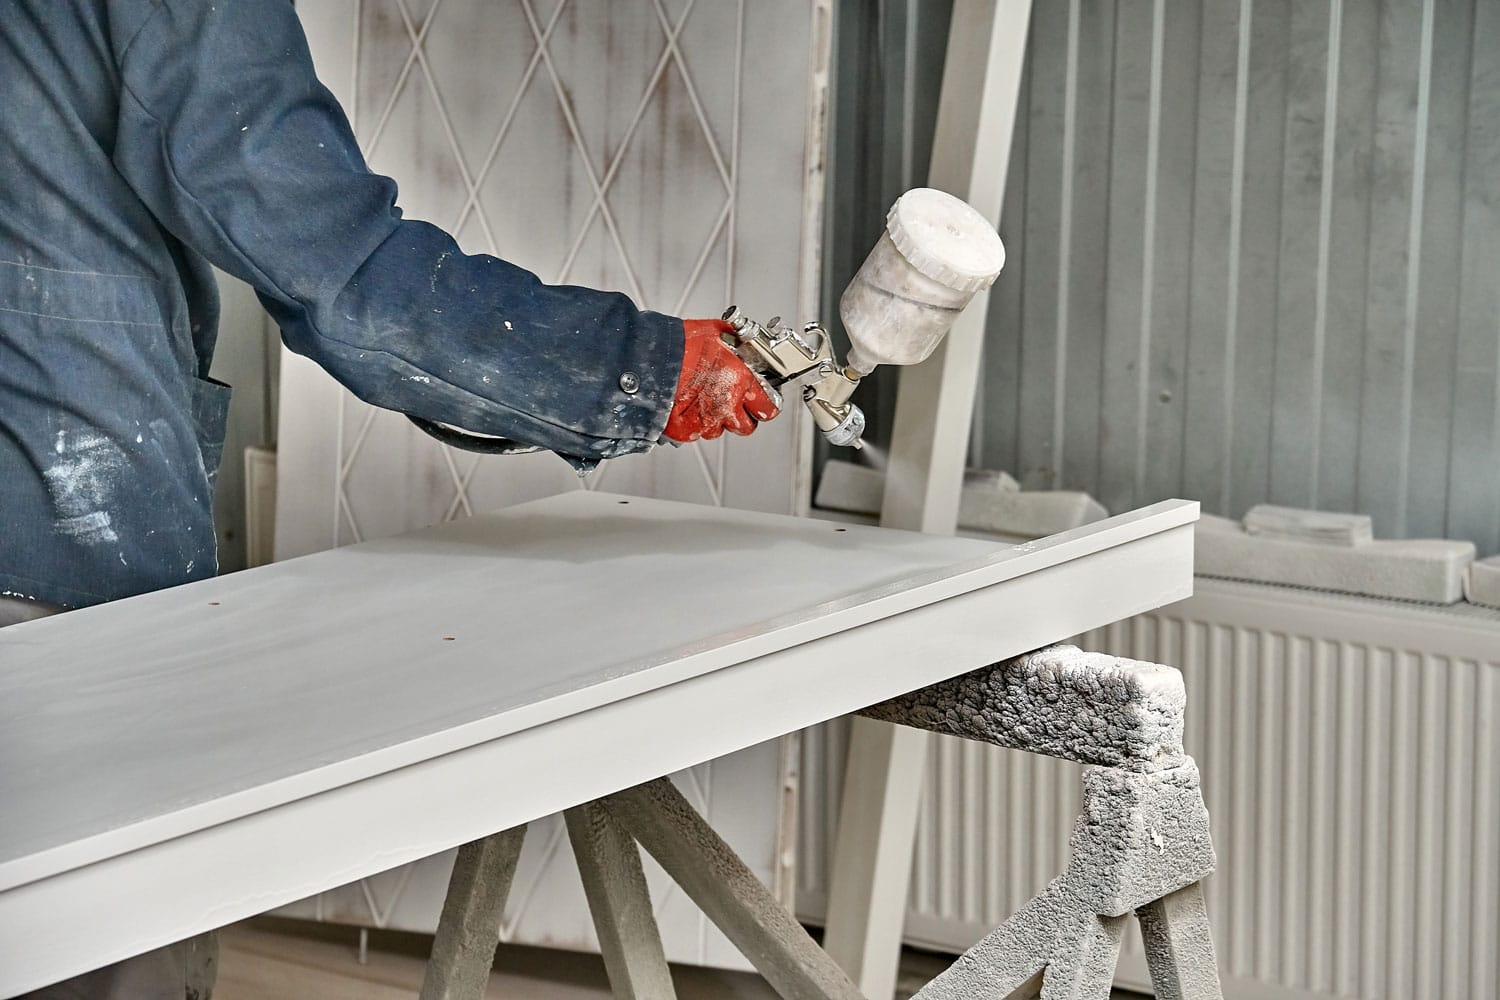 Worker spraying cabinet with gray paint